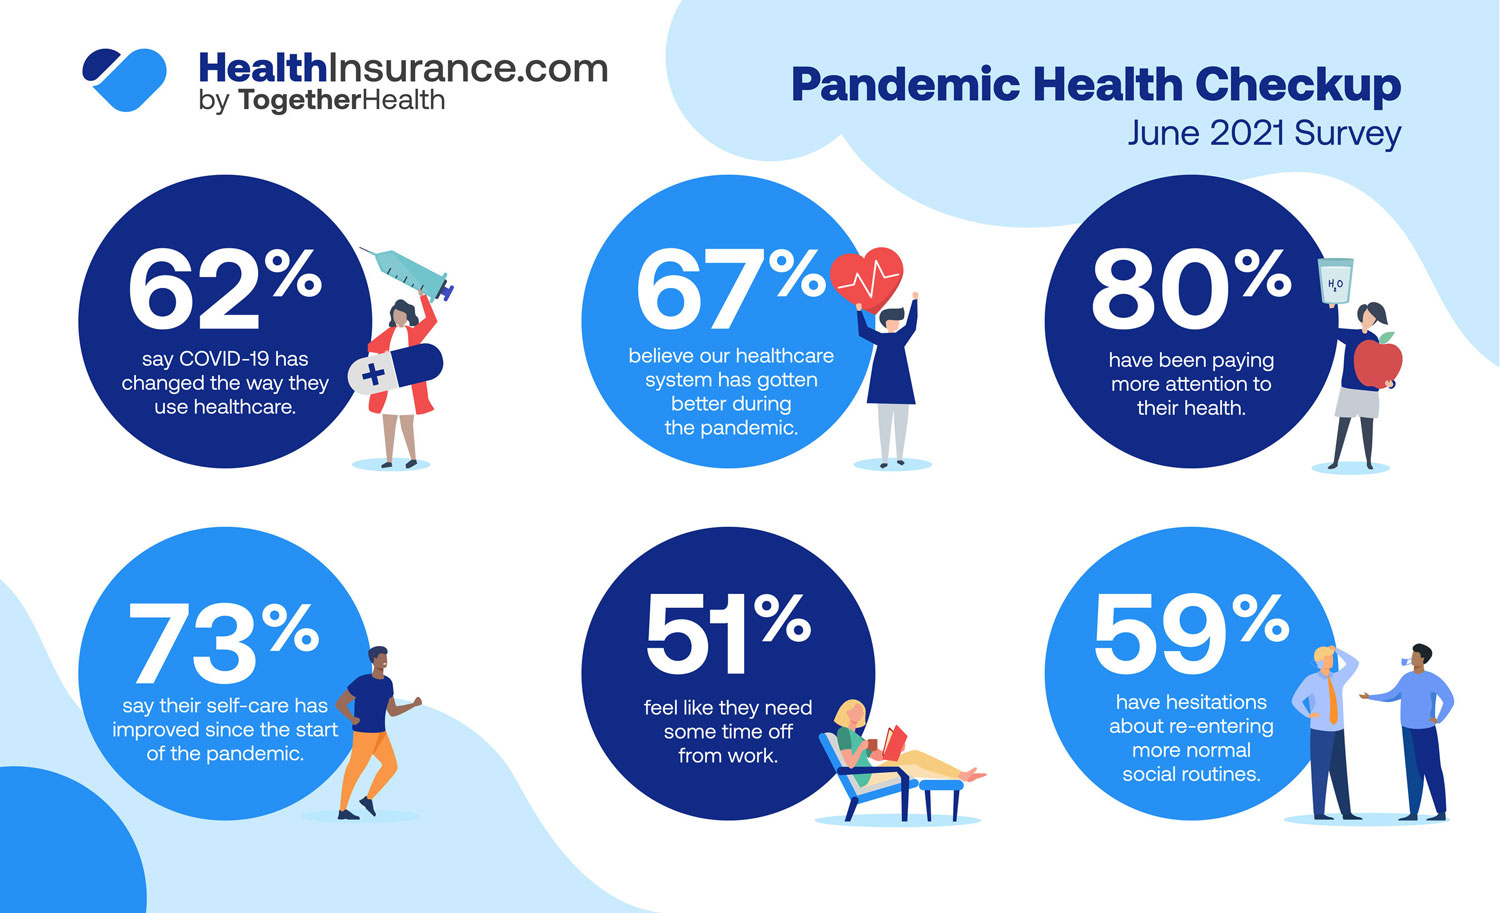 The Mental Impact of COVID-19 Pandemic